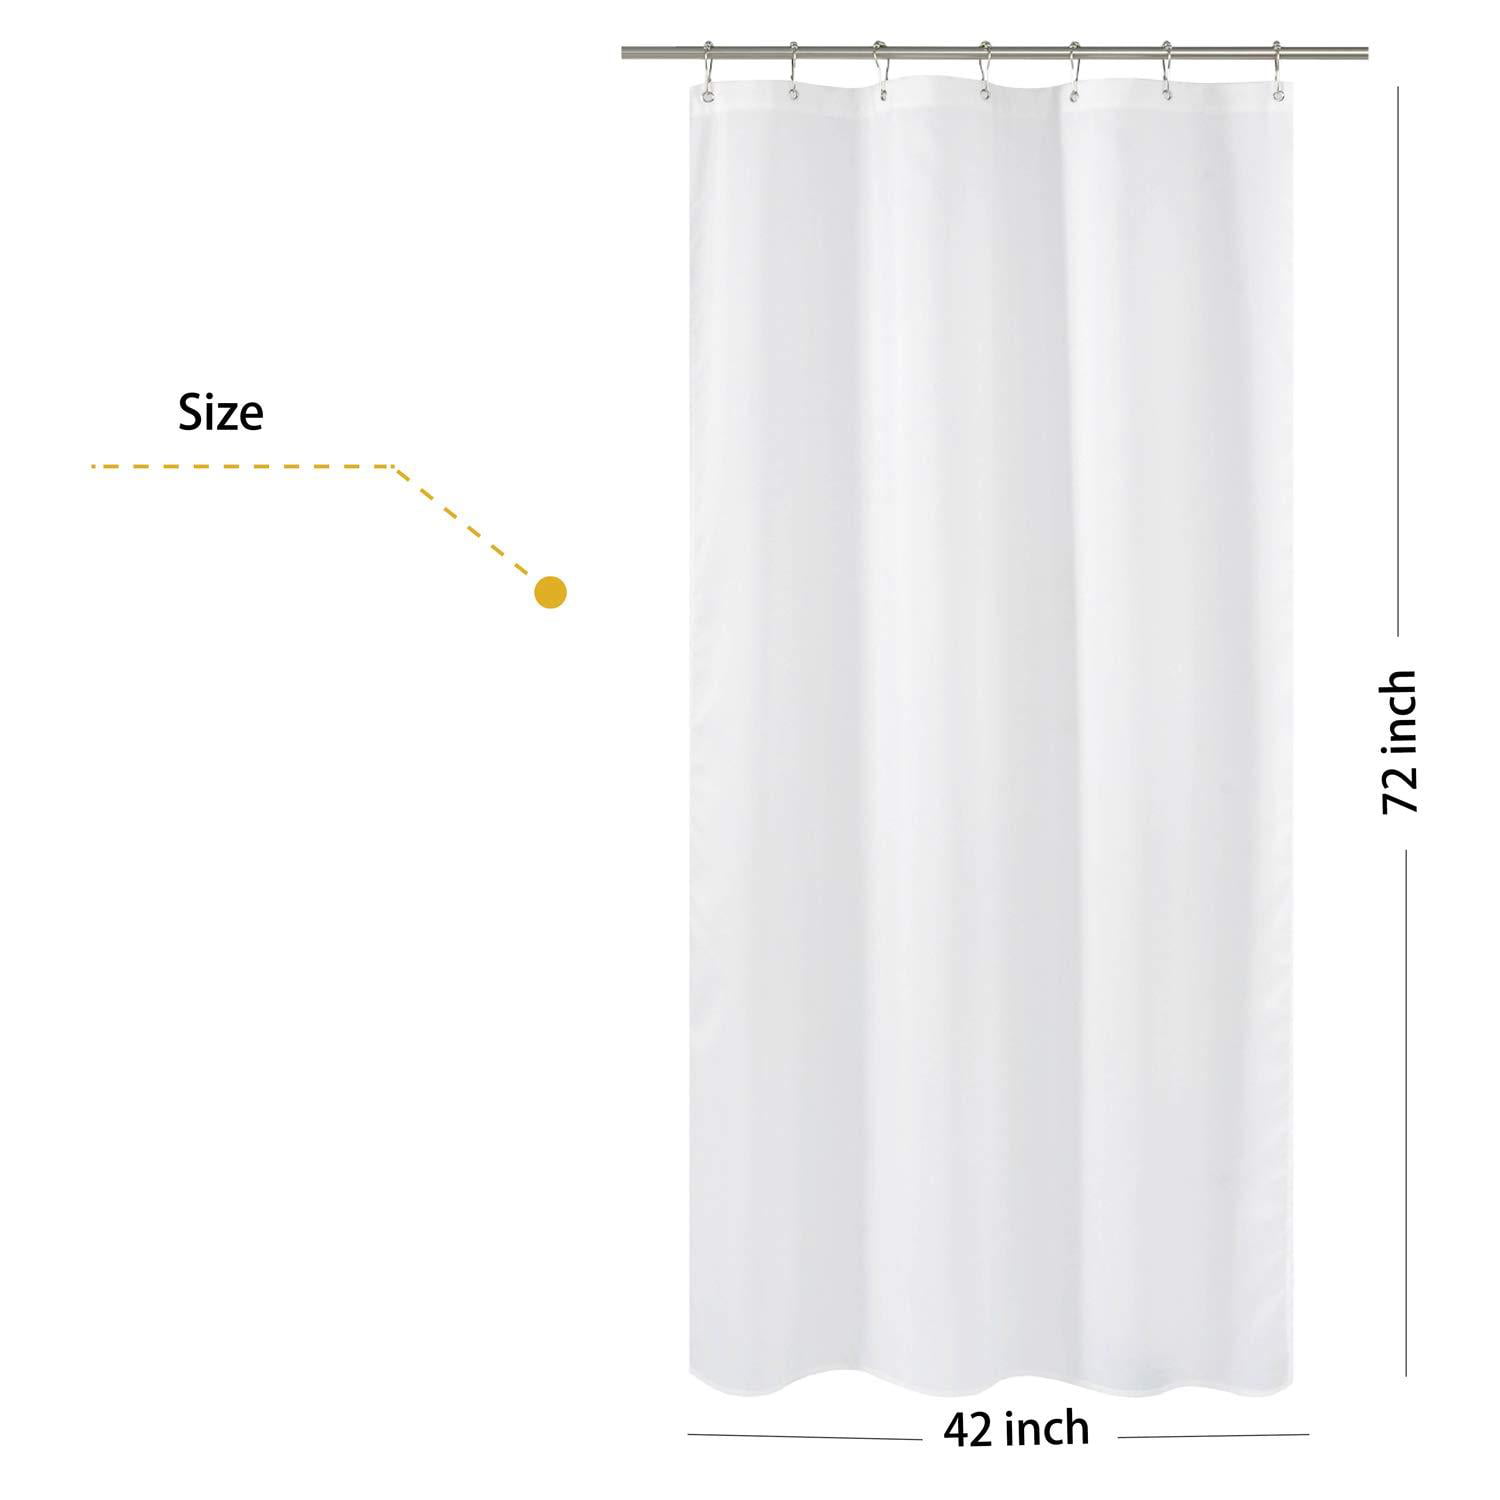 Fabric Shower Curtain Liner Stall Size, Are All Shower Curtains The Same Length